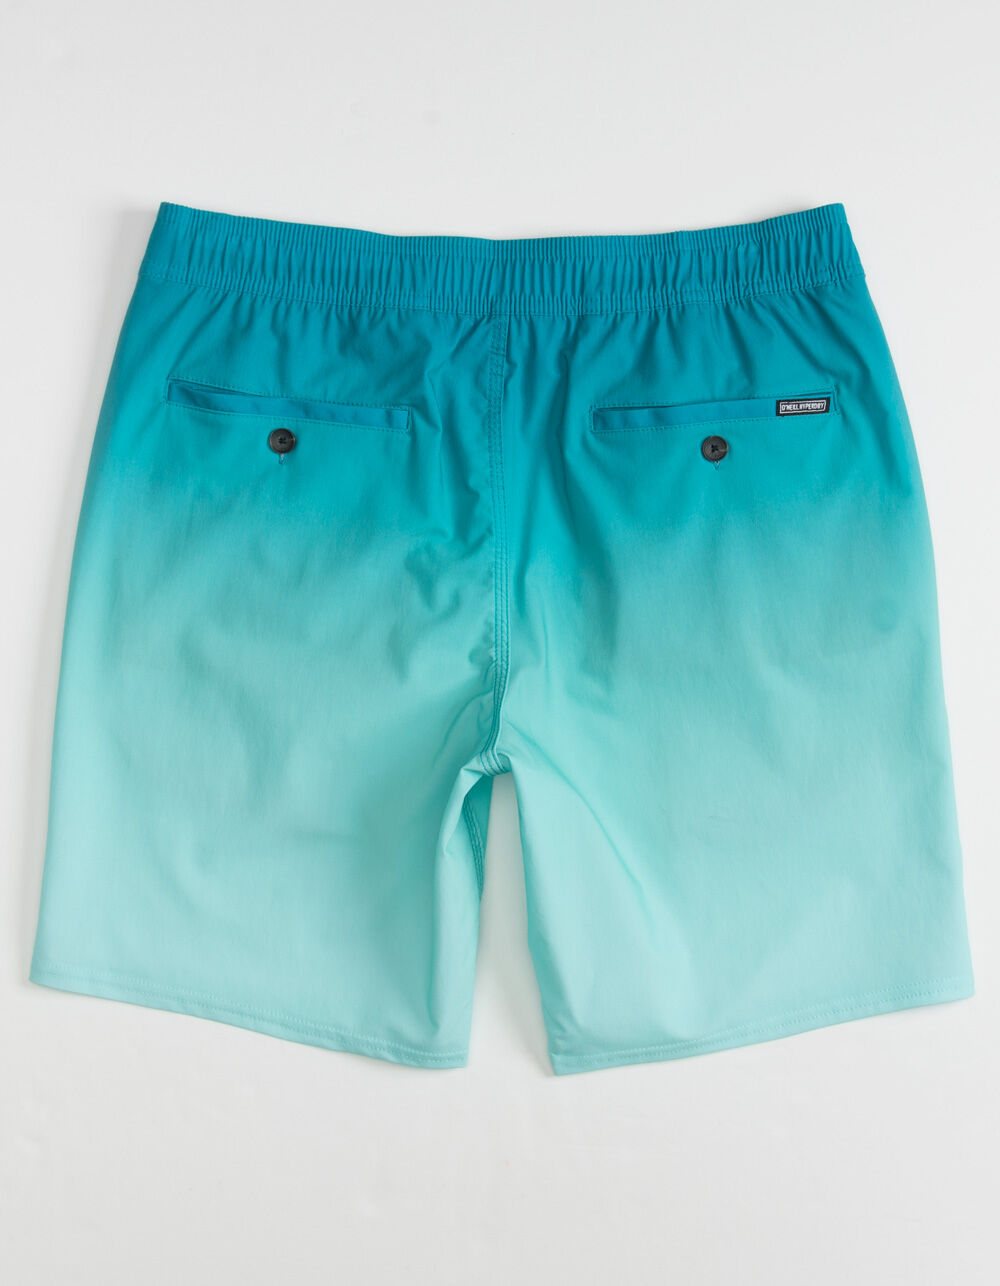 O'NEILL Stockton Hybrid Mens Volley Shorts - TURQUOISE | Tillys